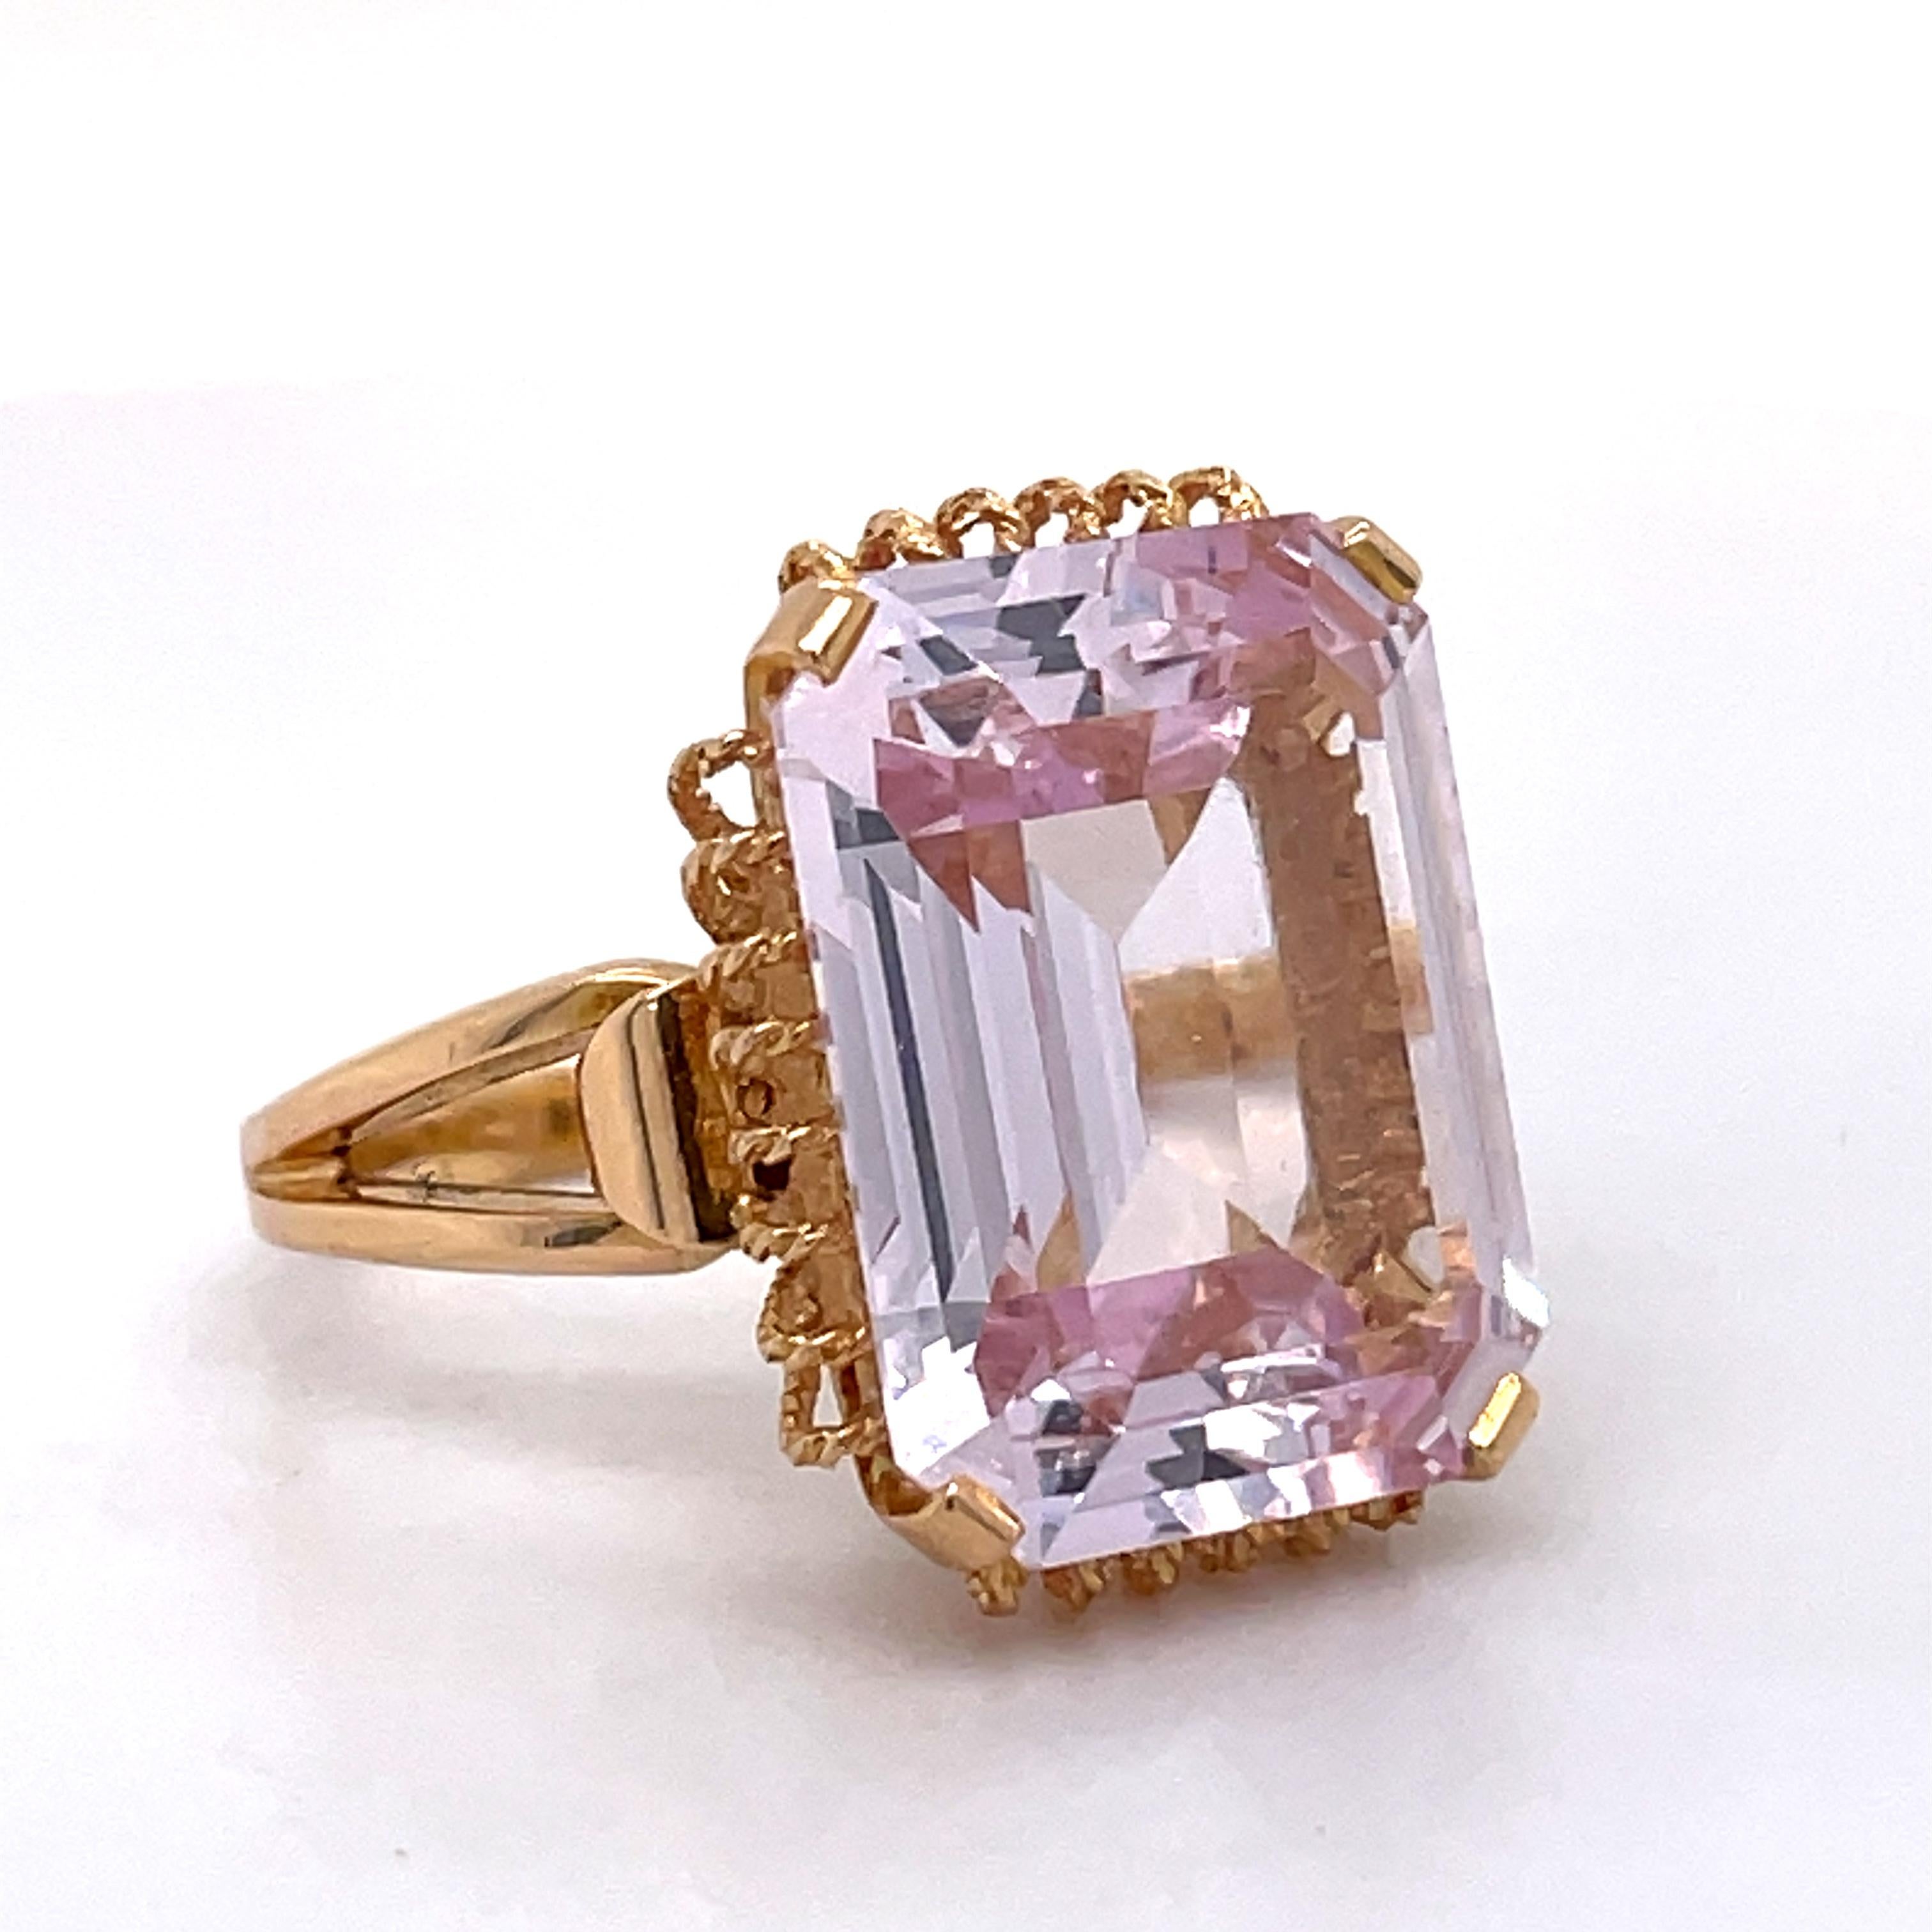 GWLAB Certified, 16.23ct Pink Spinel Emerald Cut, 14k Rose Gold, Cocktail Ring In Excellent Condition For Sale In Ramat Gan, IL